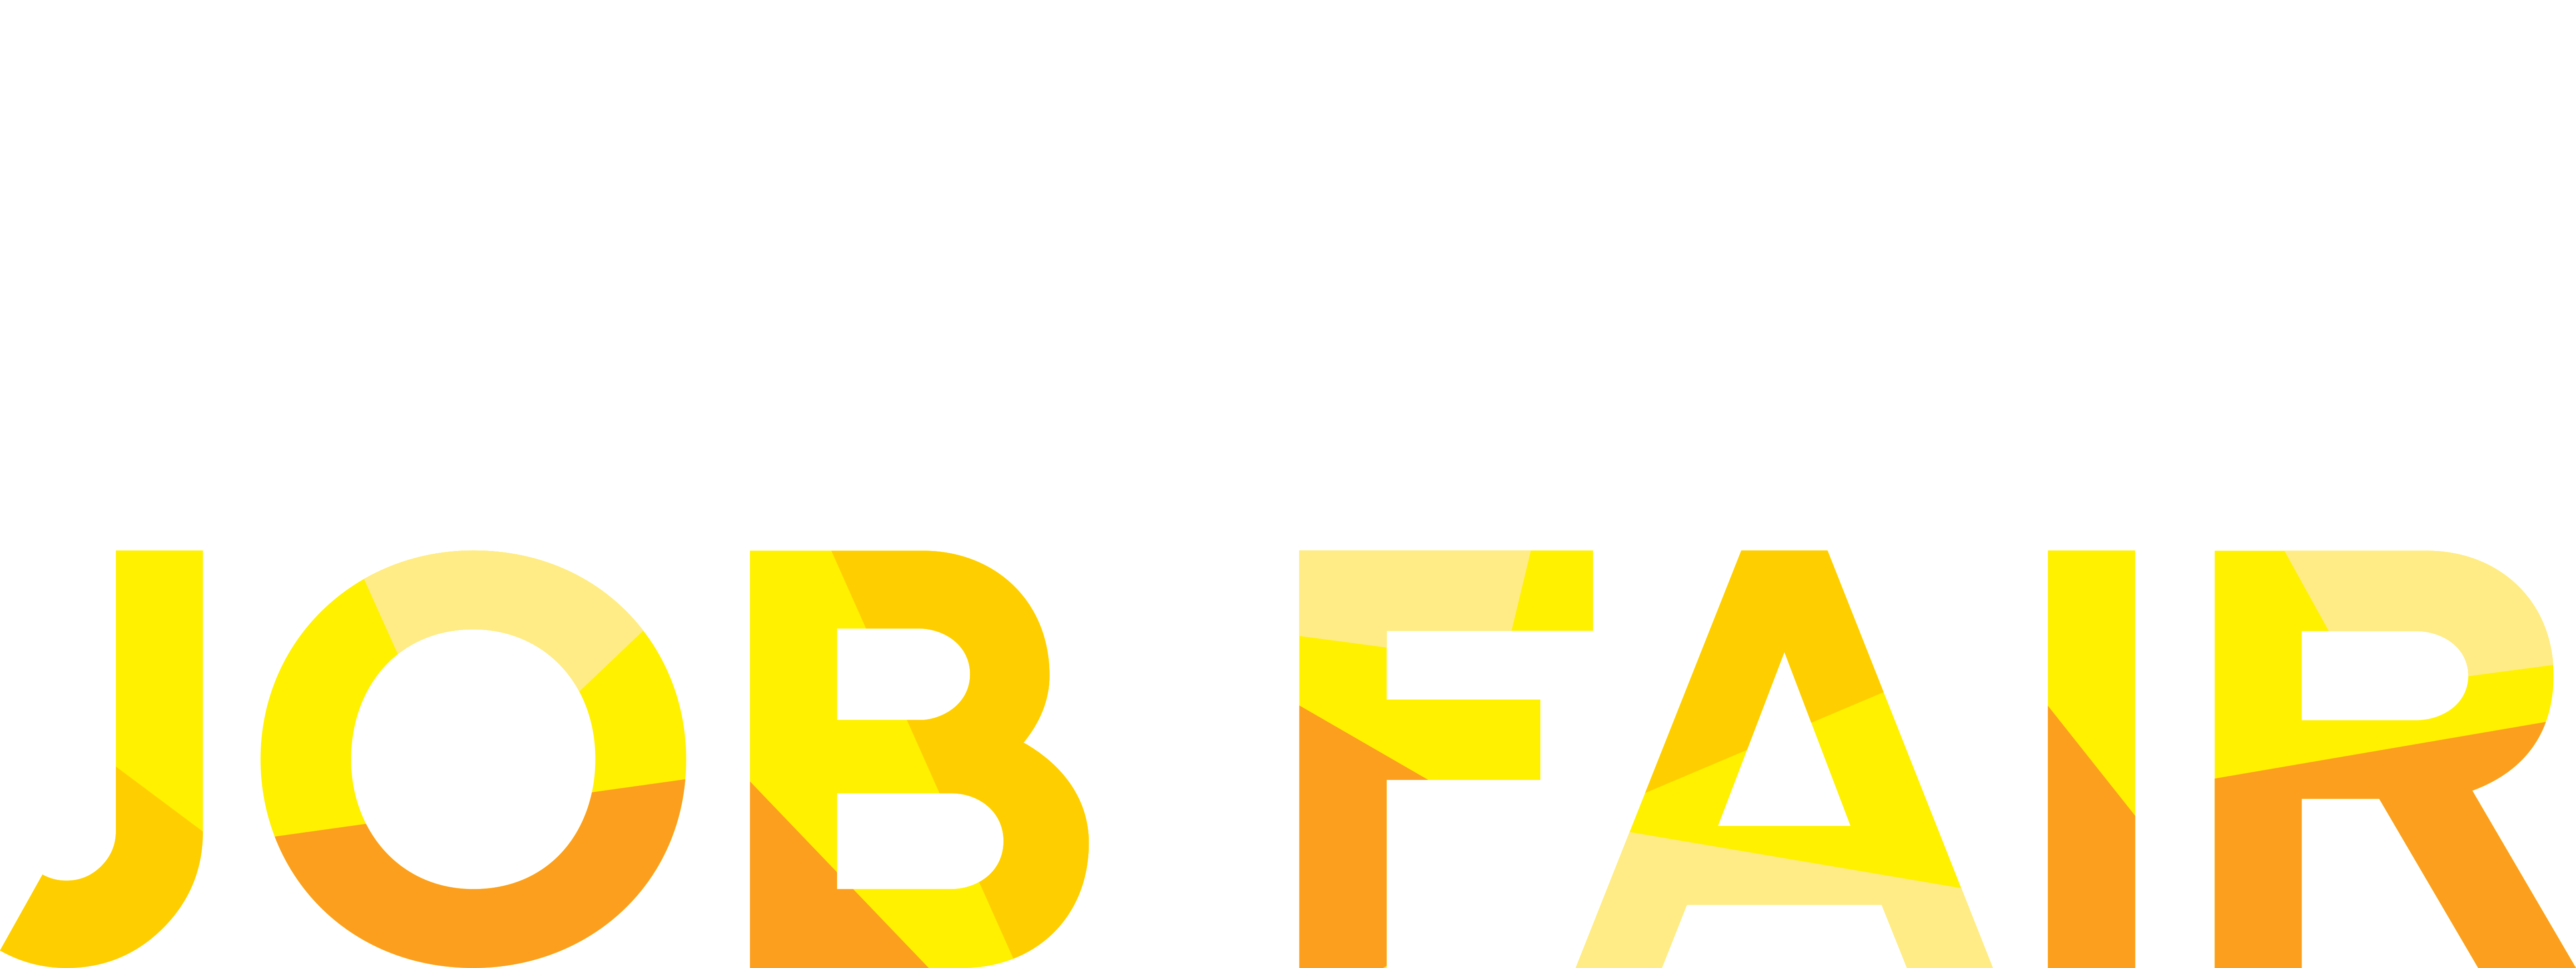 ULYSSIS presents the ULYSSIS Open Source Job Fair - Unique FOSS Job Opportunities - 13 March 2019